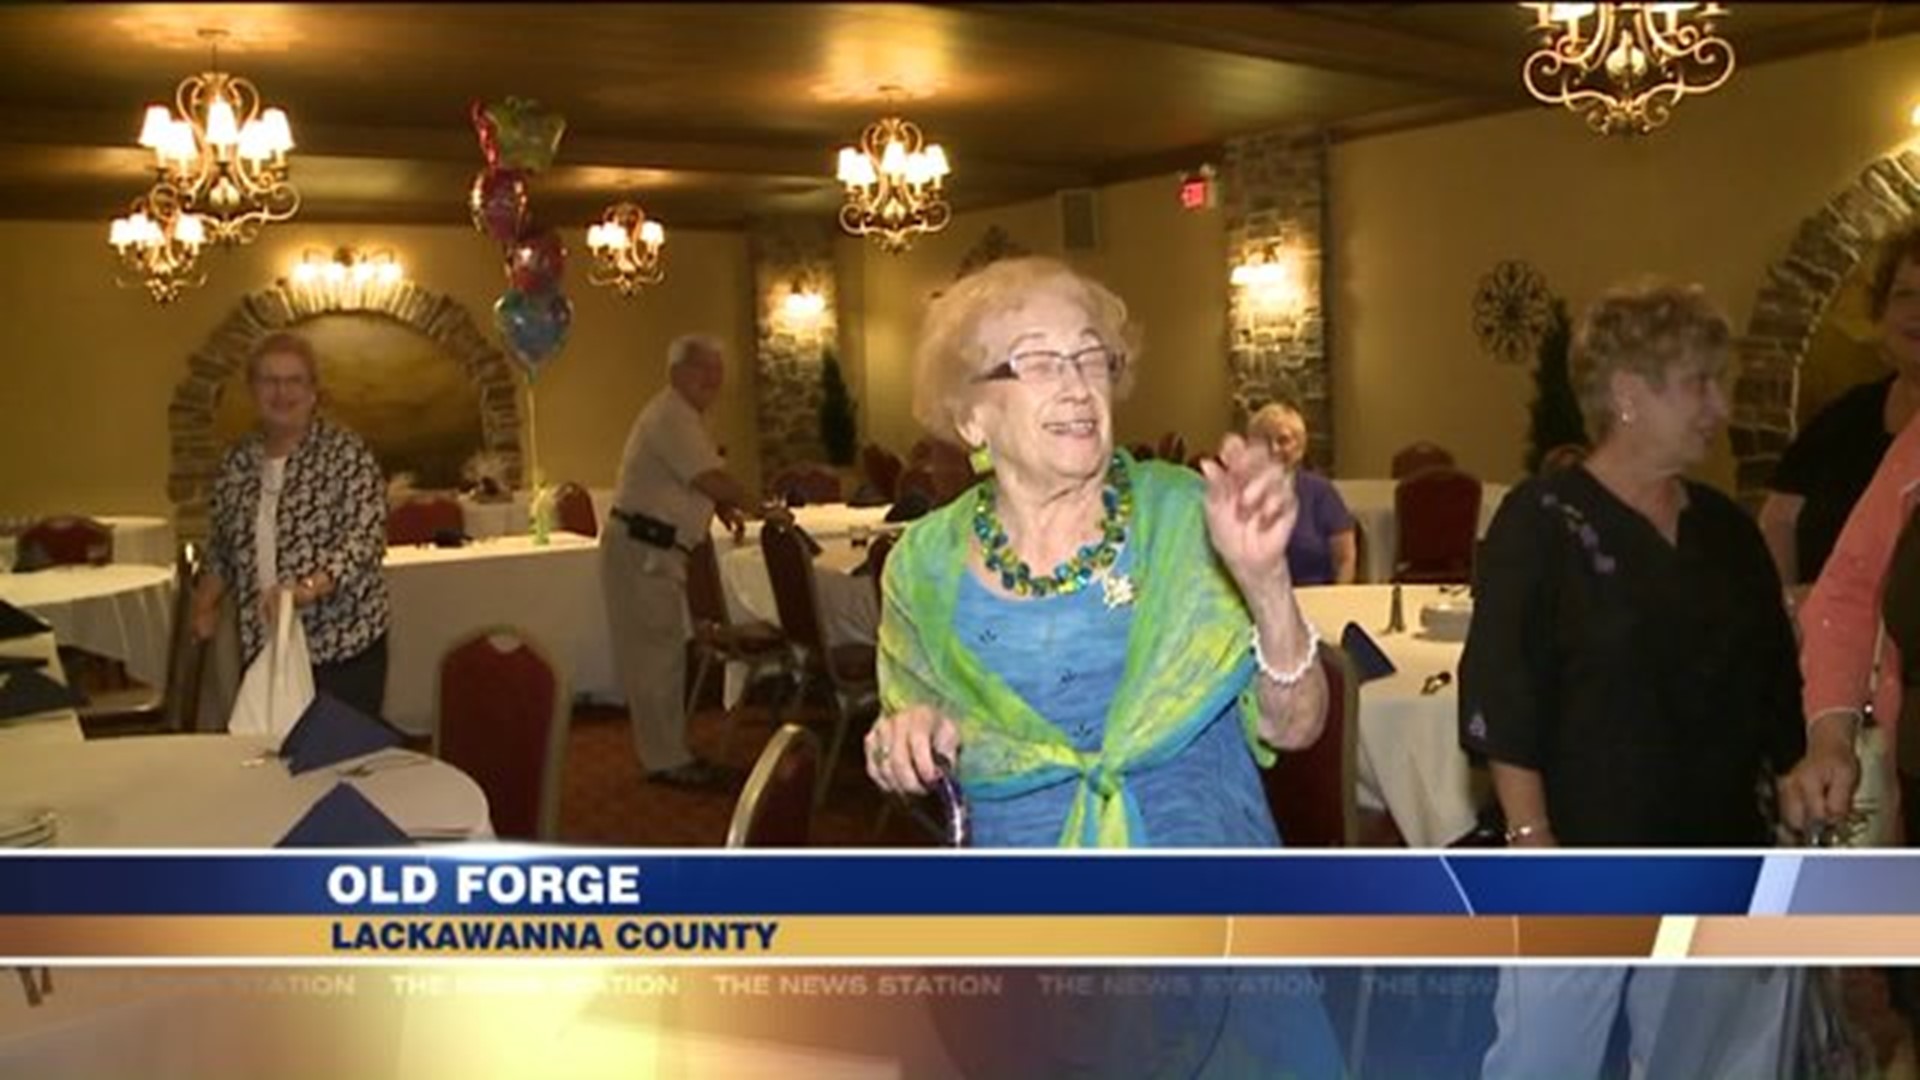 Woman Celebrates 101st Birthday in Old Forge